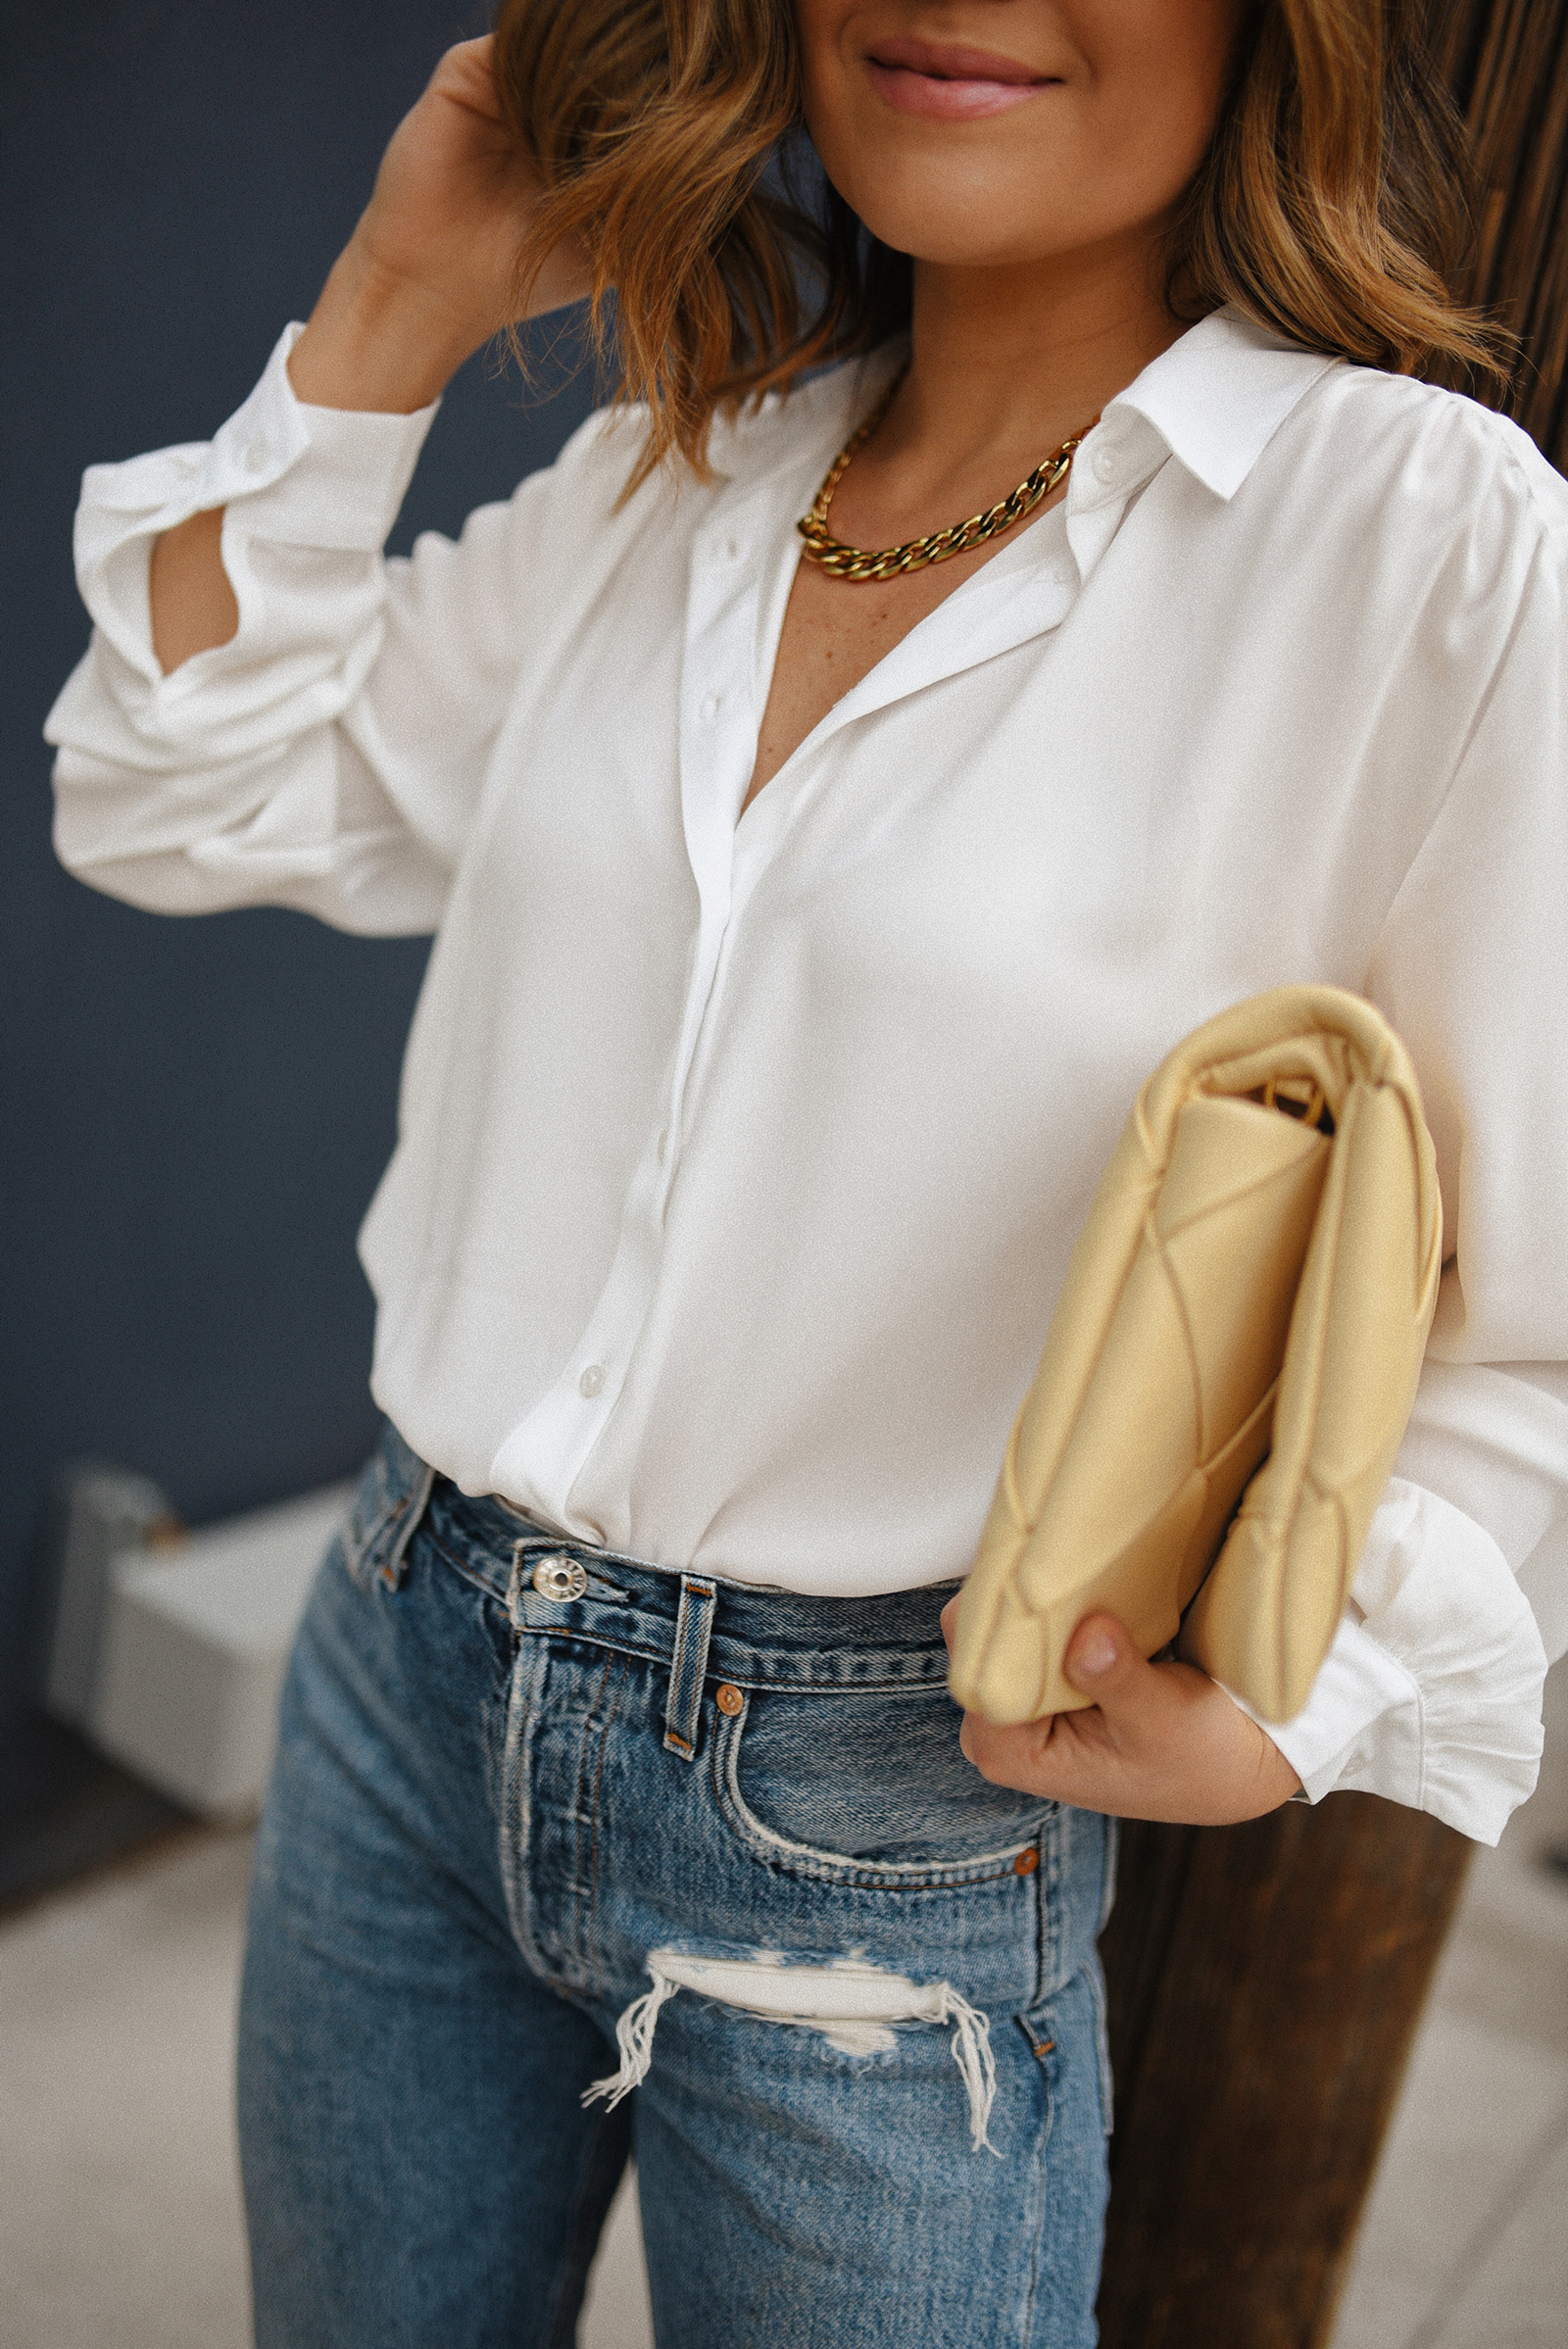 The Timeless Charm of Mom Jeans: Igniting Fashion Passion - Styles Weekly